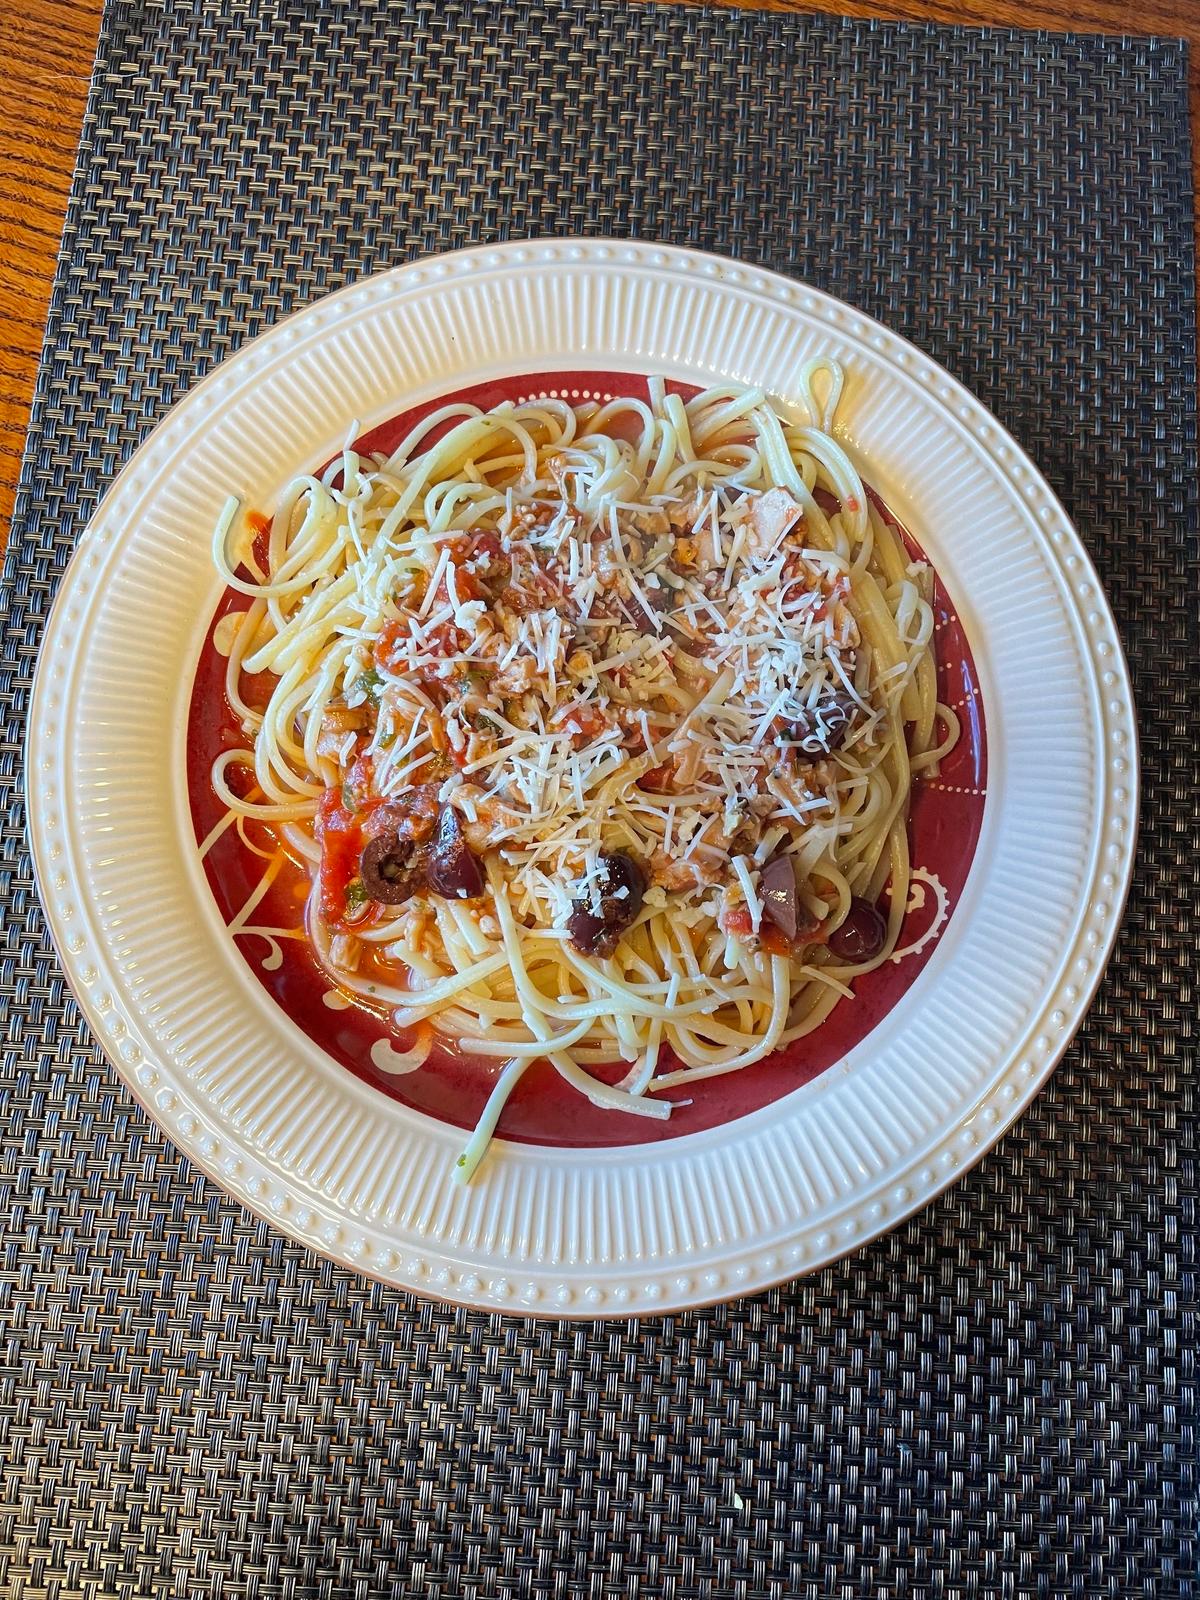 A cast of pantry staples makes this pasta quick and cost-effective. (Courtesy of Linda Johnson)